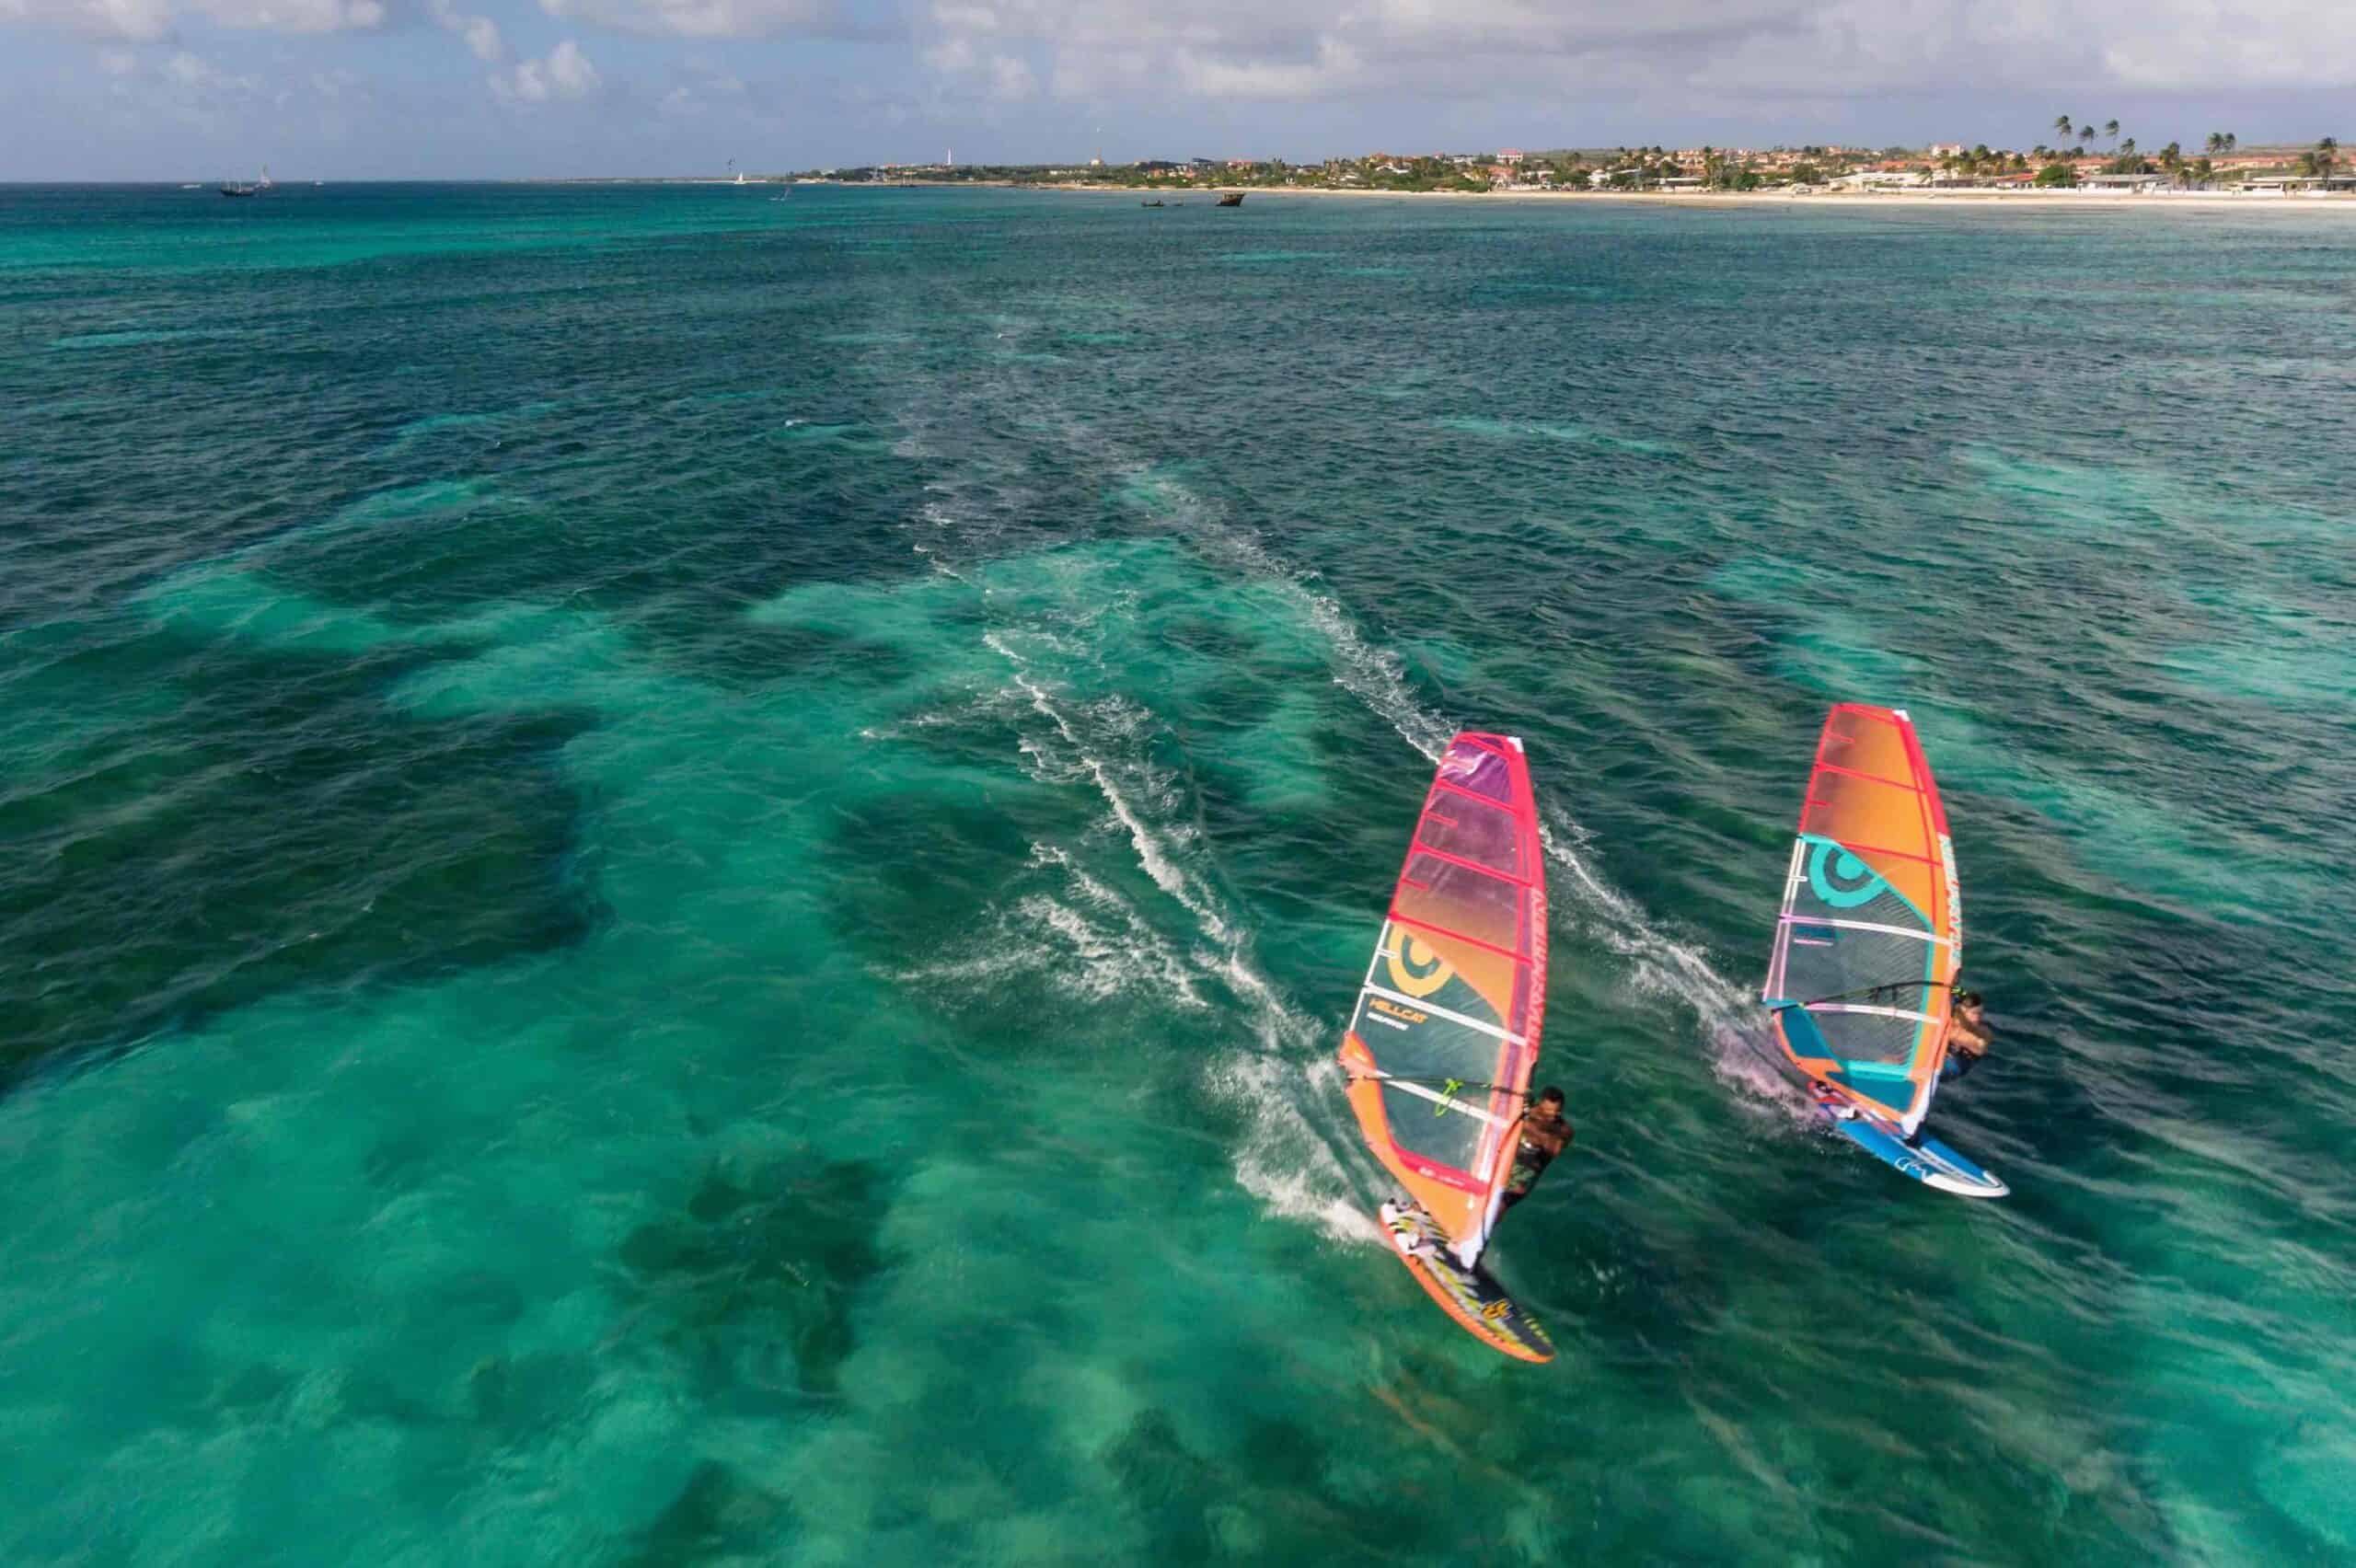 Aruba has some of the best conditions in the world to learn windsurfing. Credit: Aruba Tourism Authority